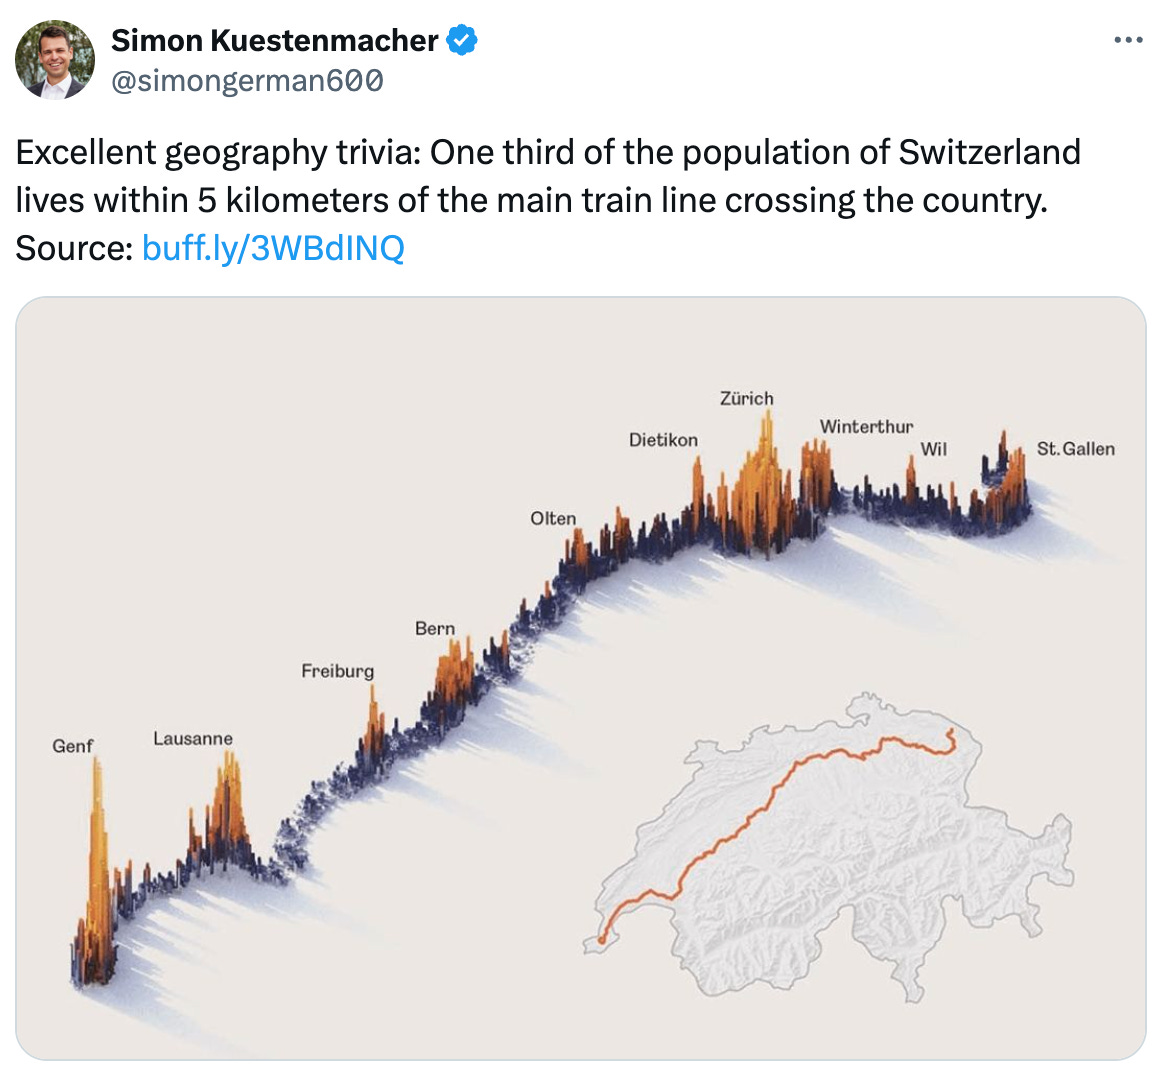 Post  See new posts Conversation Simon Kuestenmacher @simongerman600 Excellent geography trivia: One third of the population of Switzerland lives within 5 kilometers of the main train line crossing the country. Source: https://buff.ly/3WBdINQ